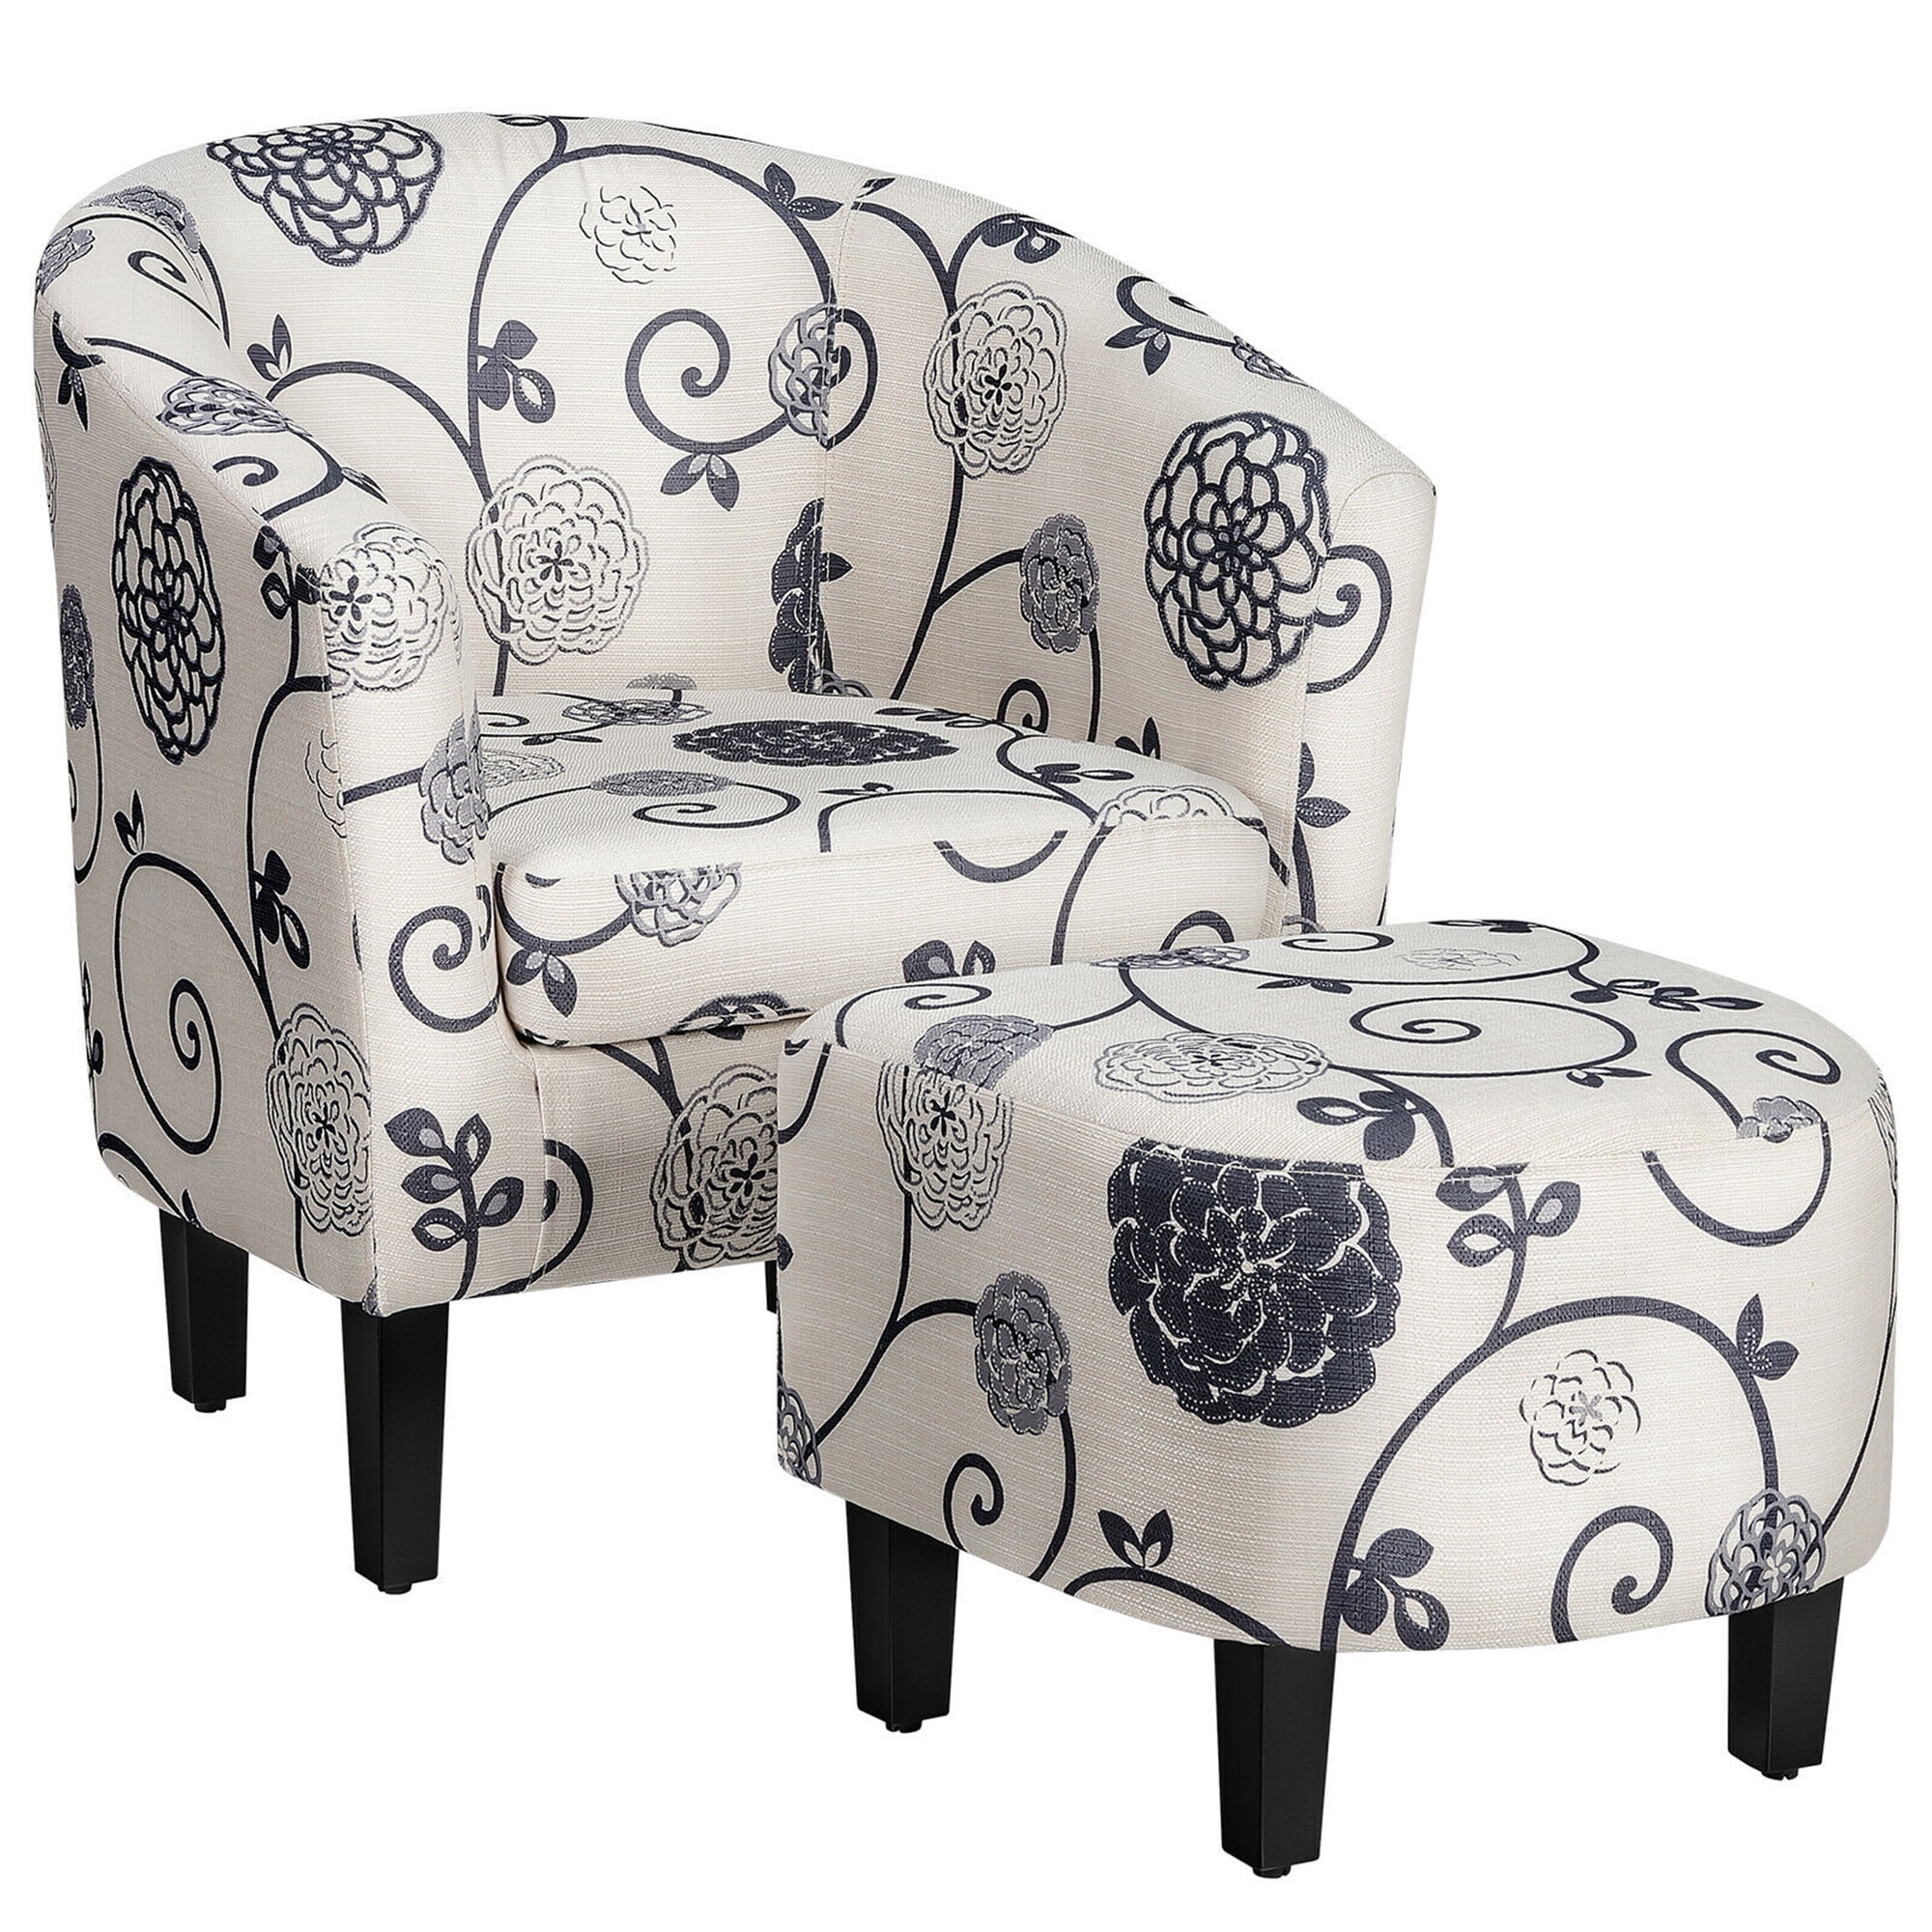 Gymax Modern Accent Tub Chair Ottoman Set Fabric Upholstered Club Chair Grey Floral 1c67cec1 Deff 415e Bd2f E9567bfec8bf.f00d5f6e077a40b07a77341e39db4bdb 